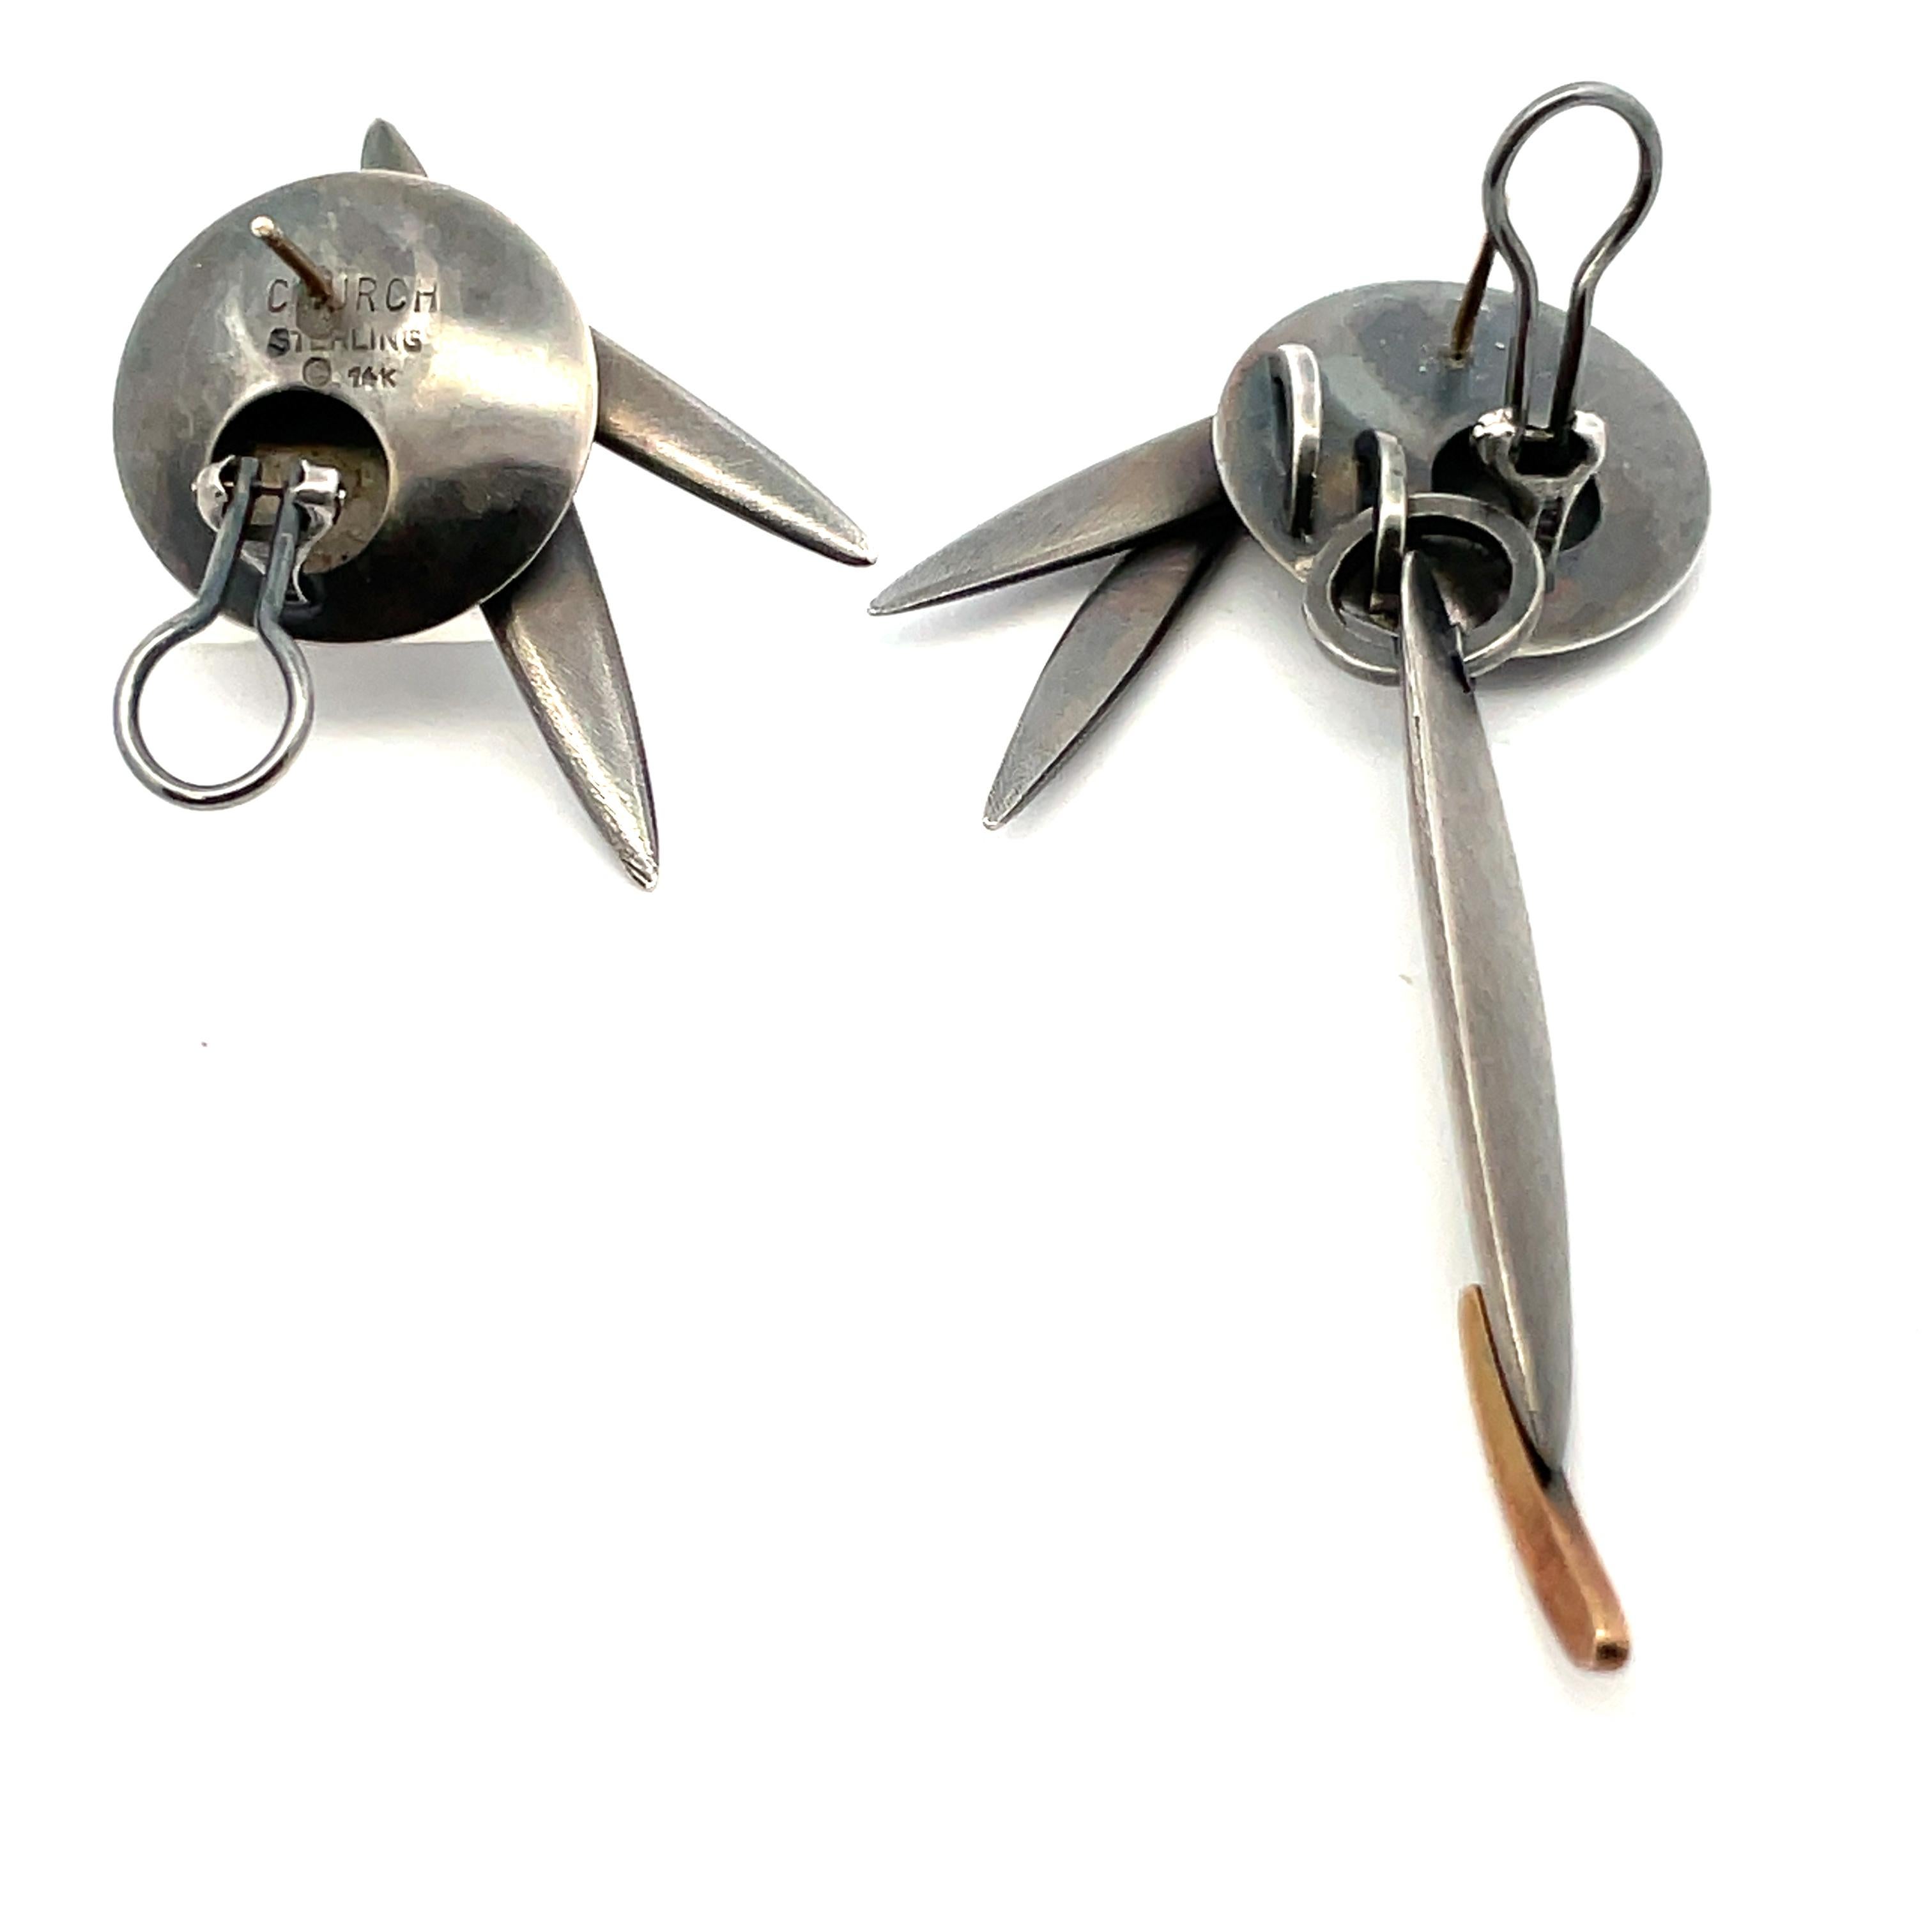 Sharon Church: Asymmetrical Sterling Earrings In Good Condition For Sale In New York, NY